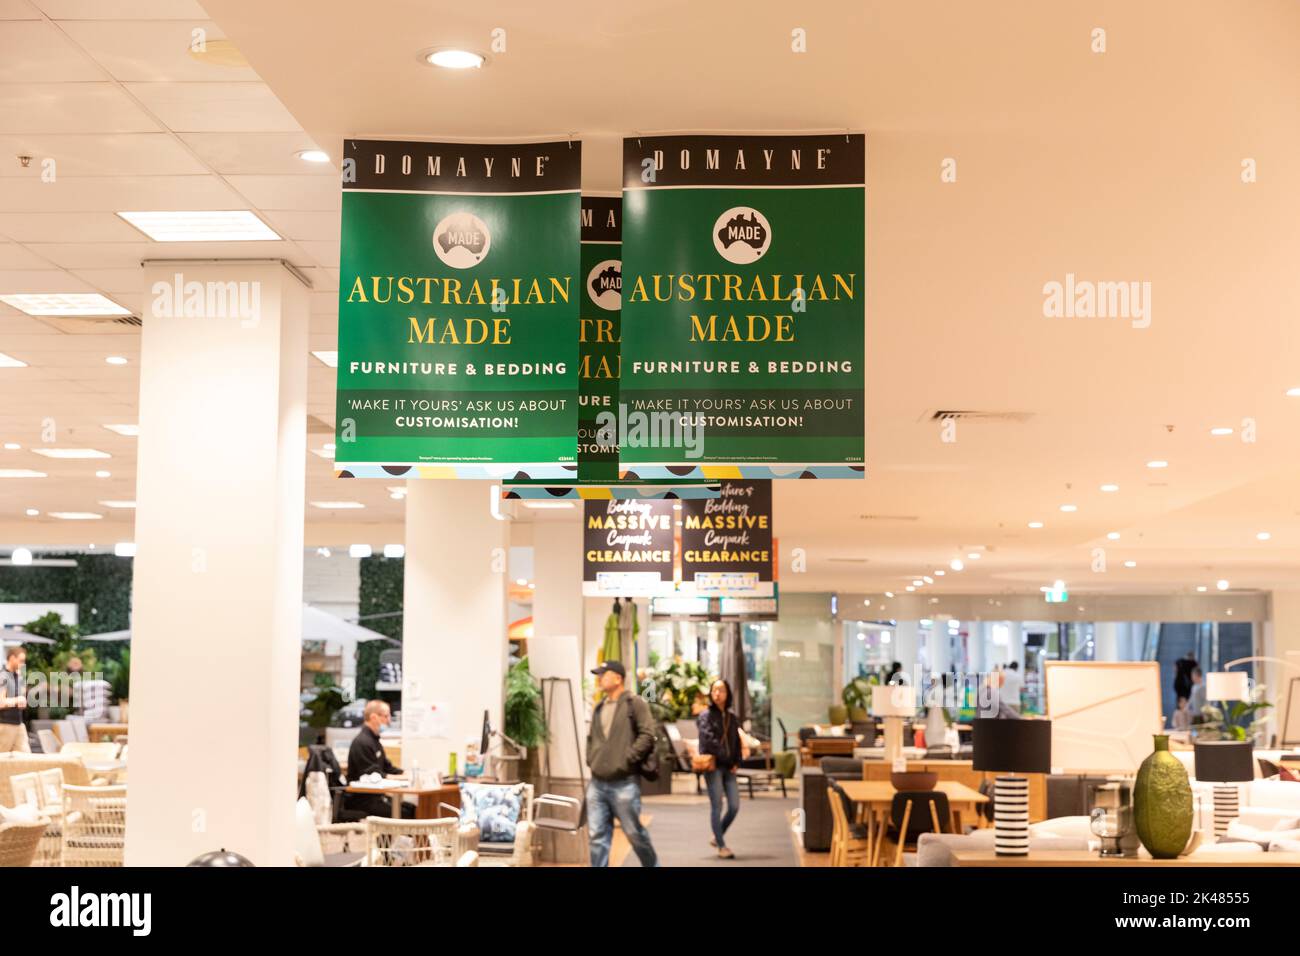 Domayne Harvey Normal furniture and bedding store, sign hanging from ceiling promotes australian made bedding and furniture,Sydney,NSW,Australia Stock Photo